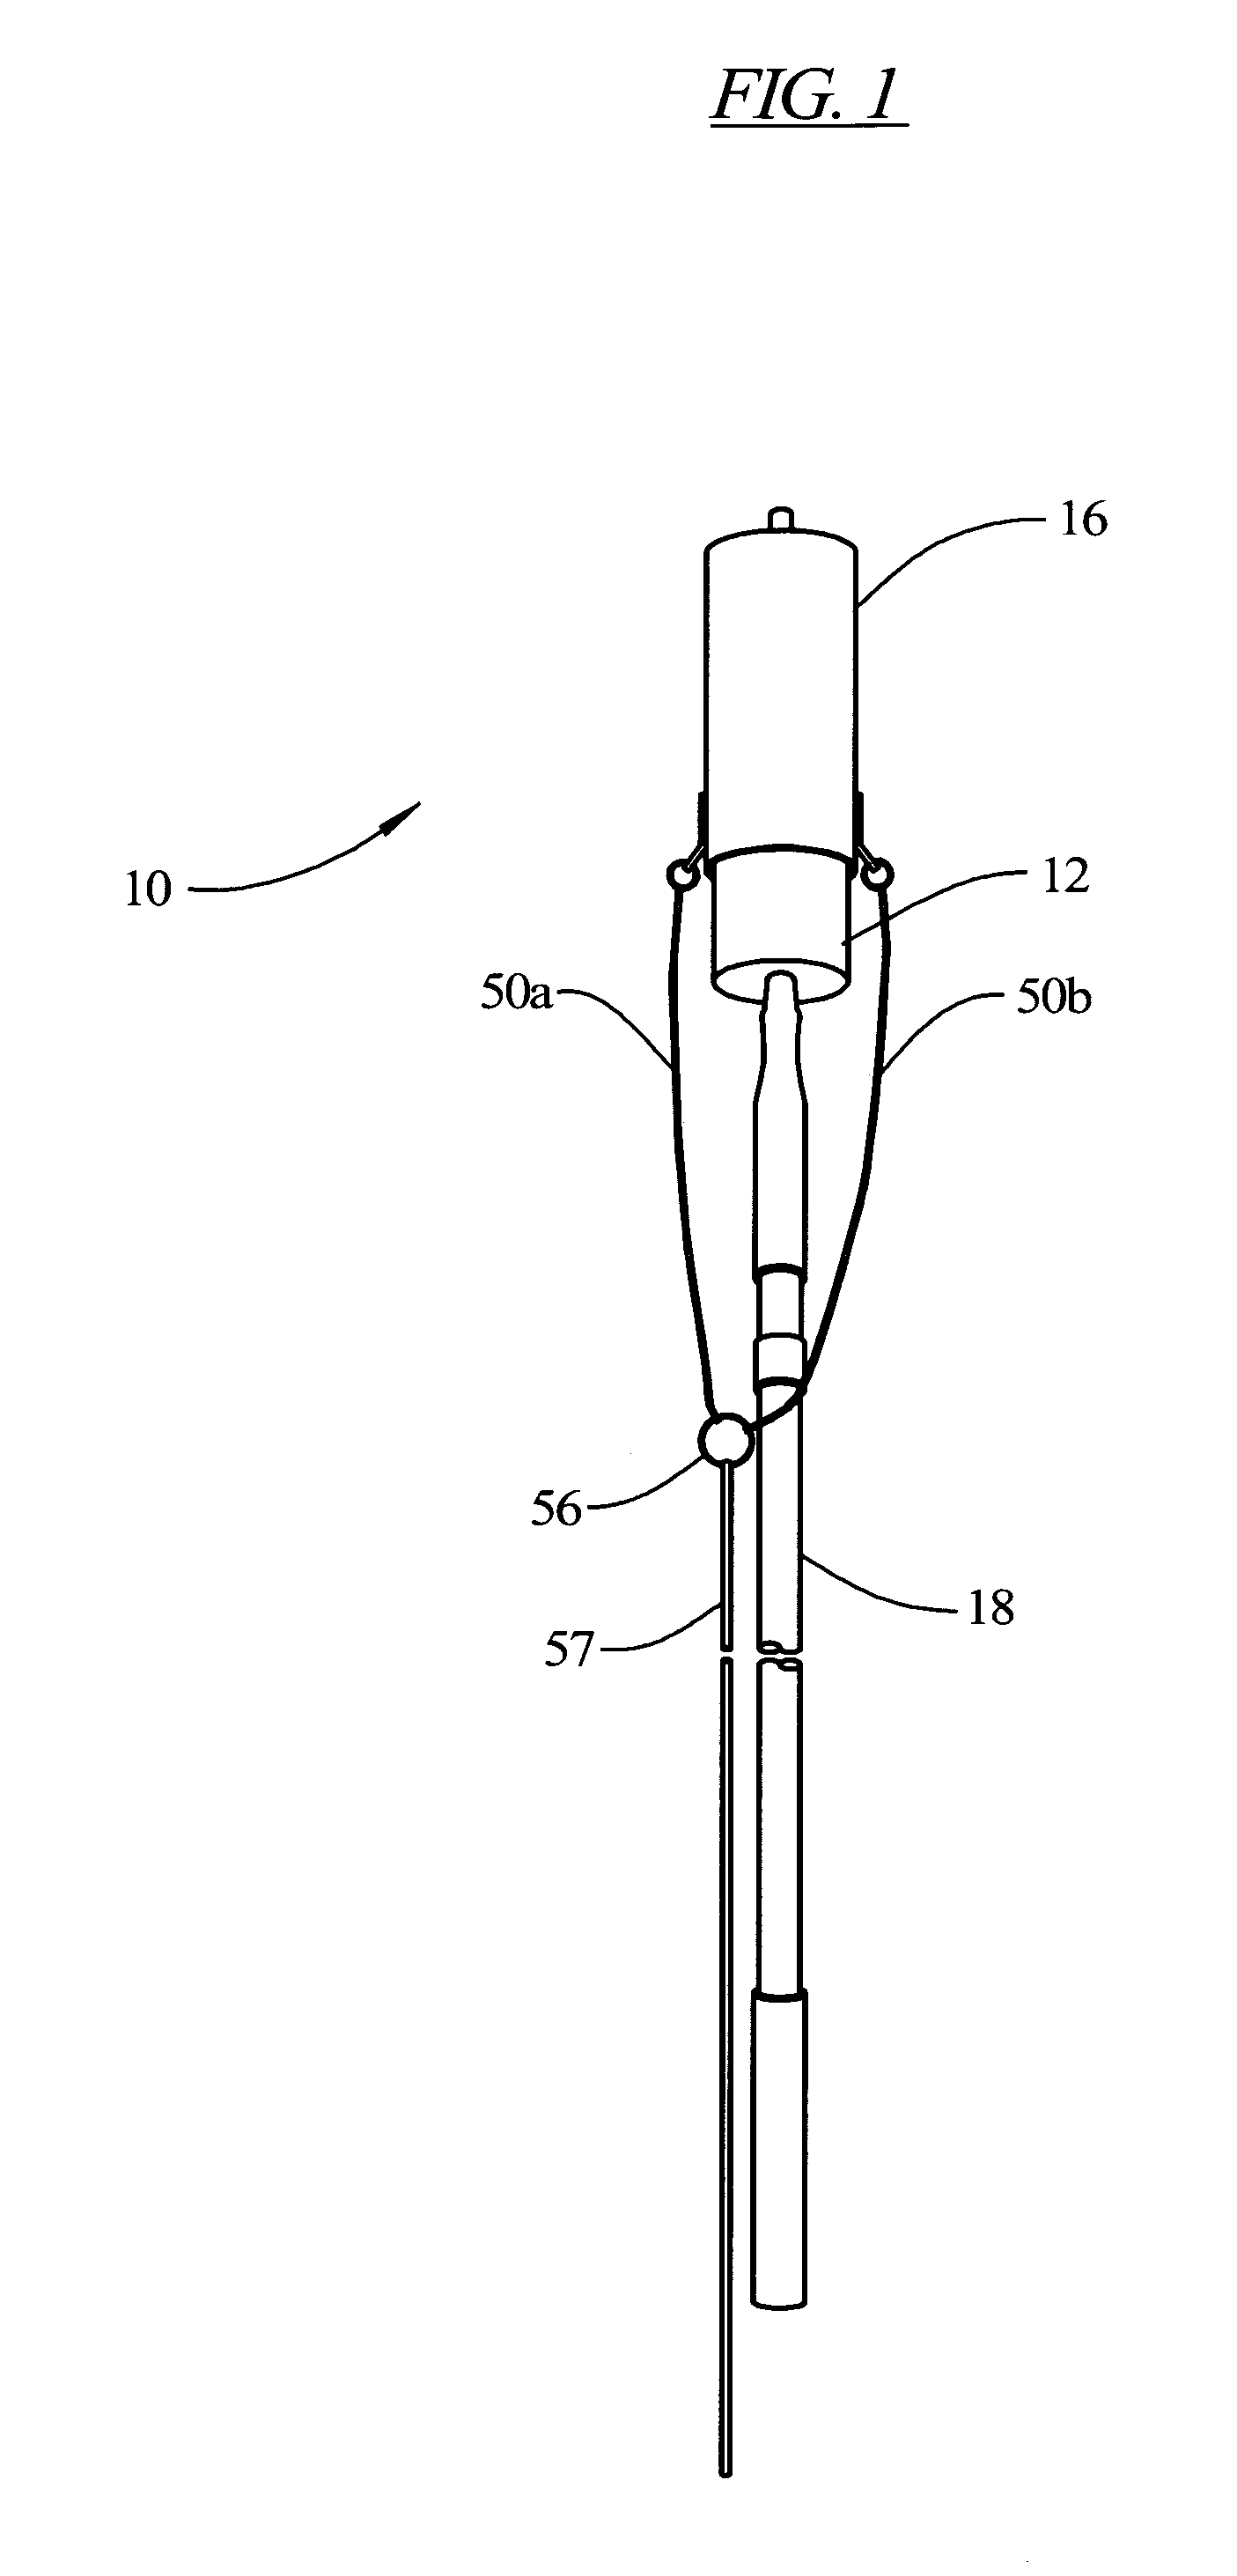 Apparatus for discharging pressurized liquids at elevated positions